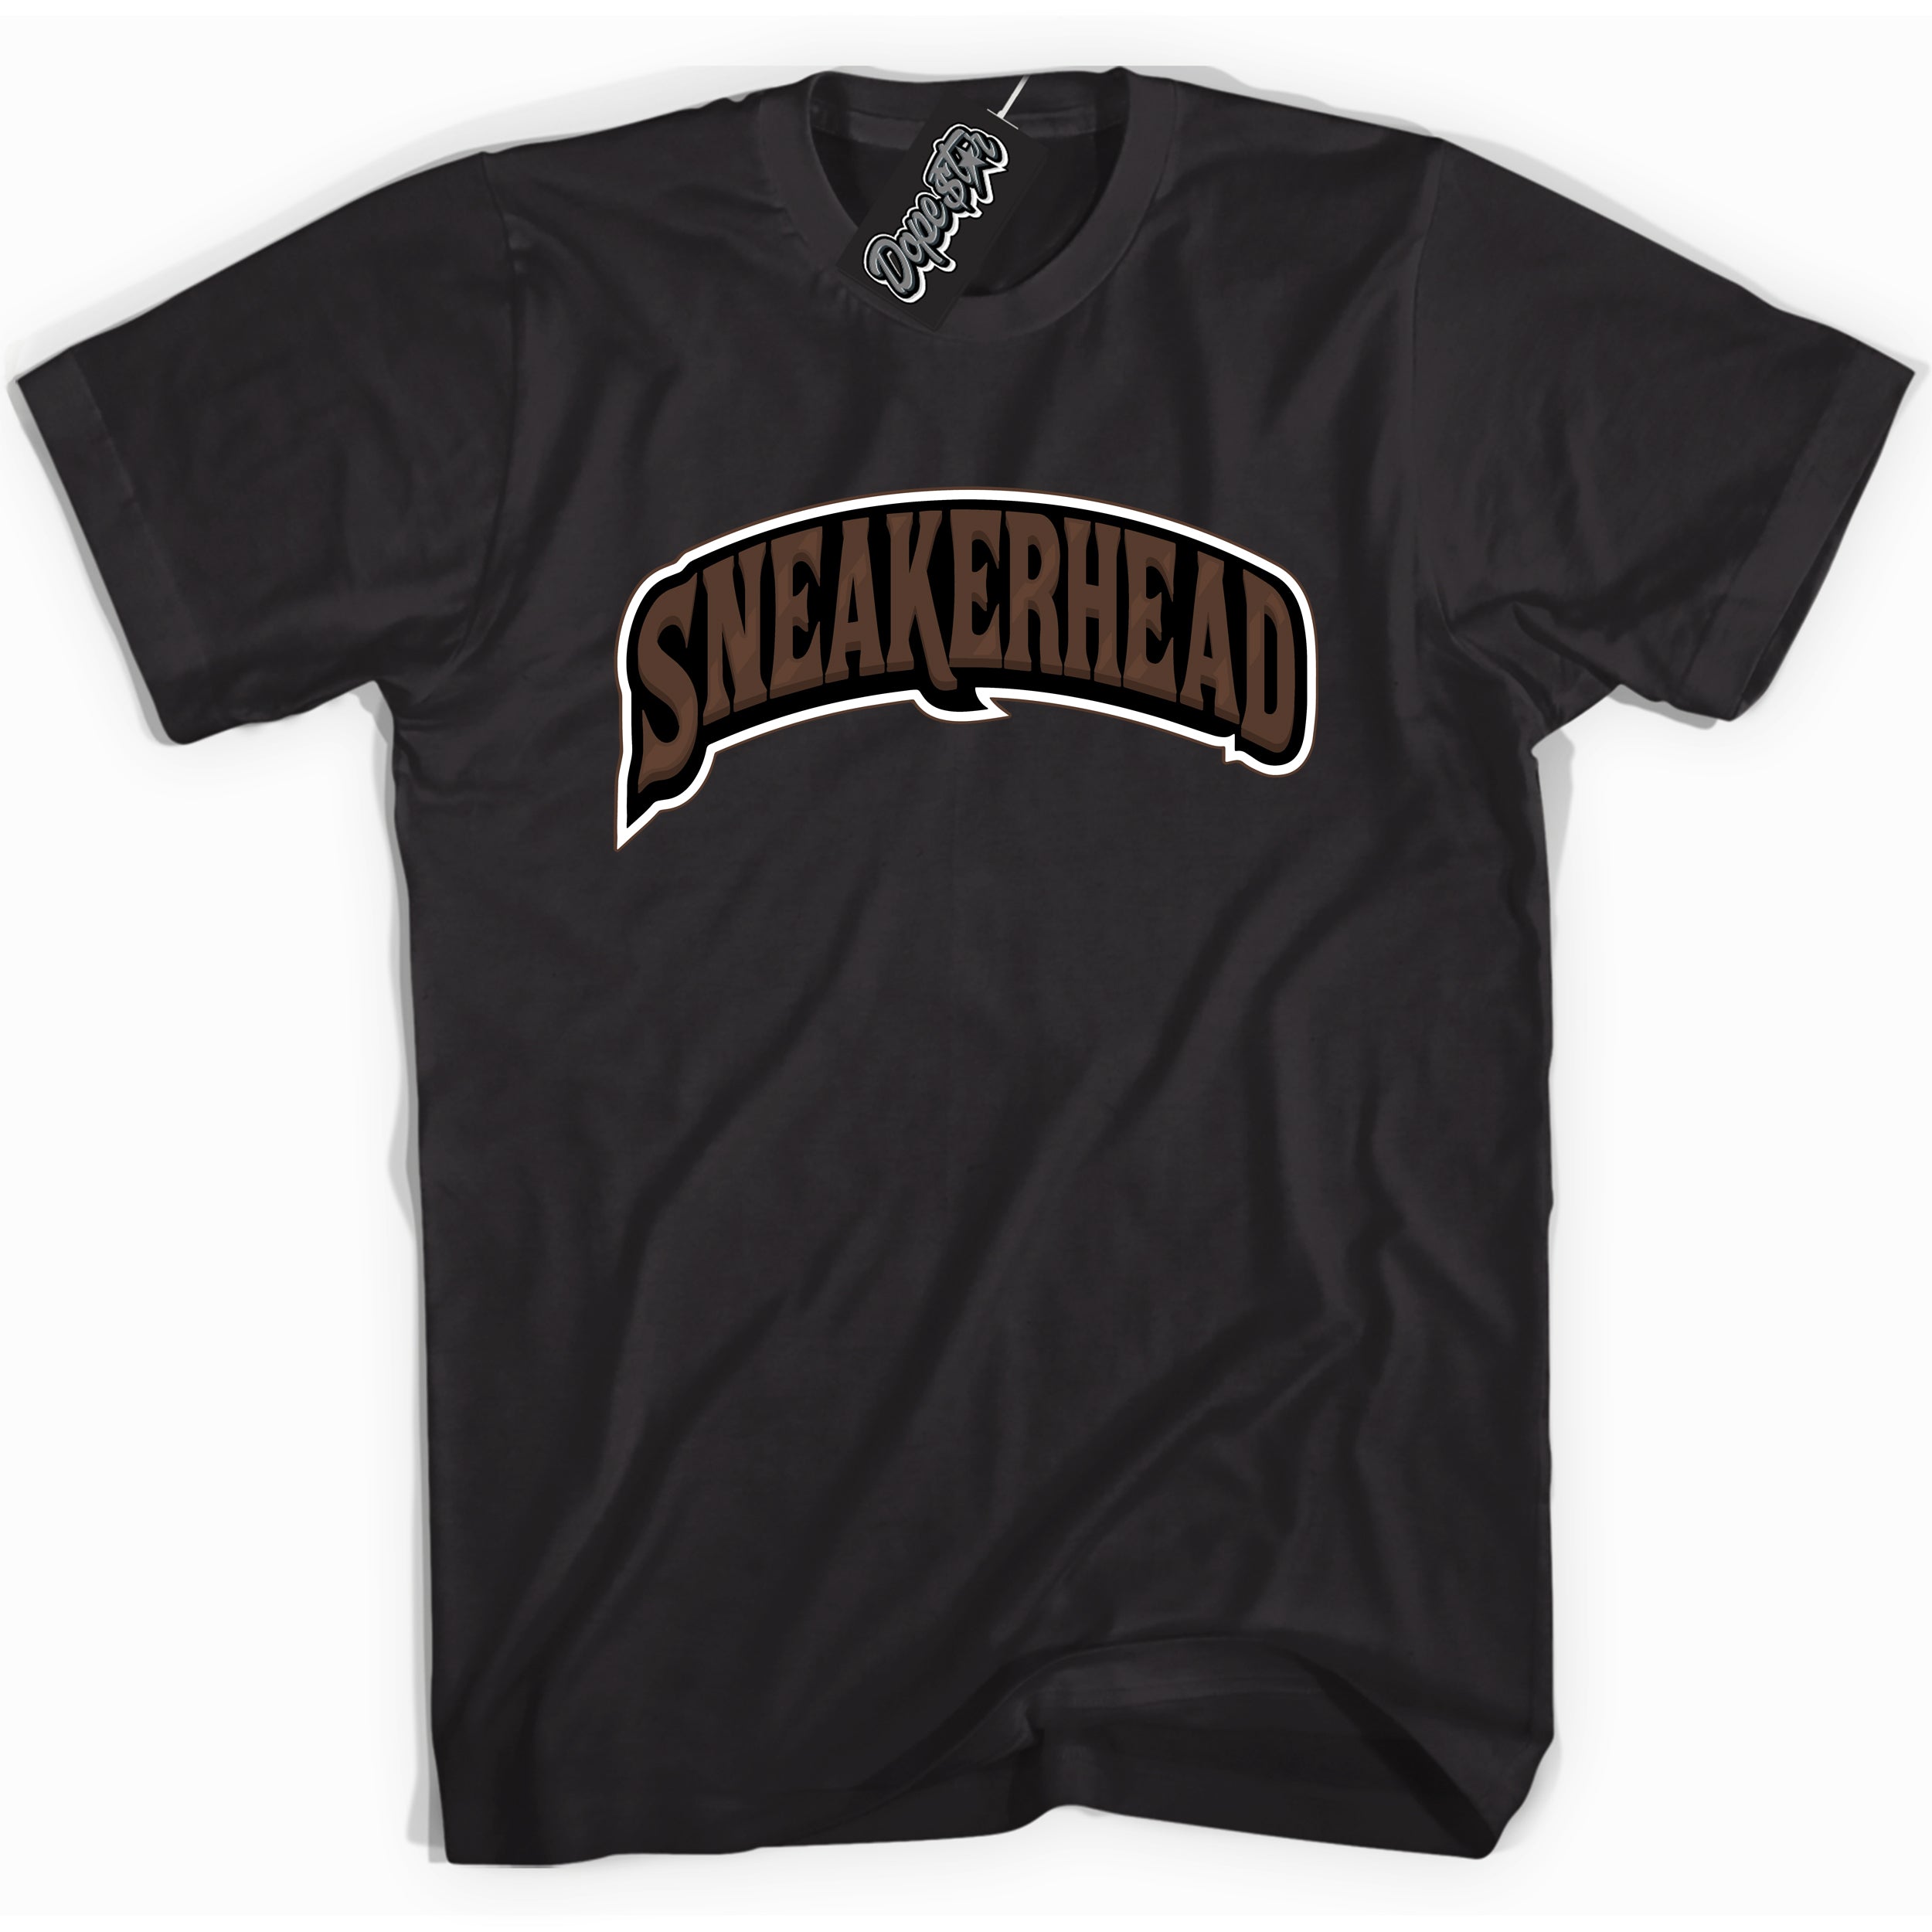 Cool Black graphic tee with “ Sneakerhead ” design, that perfectly matches Palomino 1s sneakers 